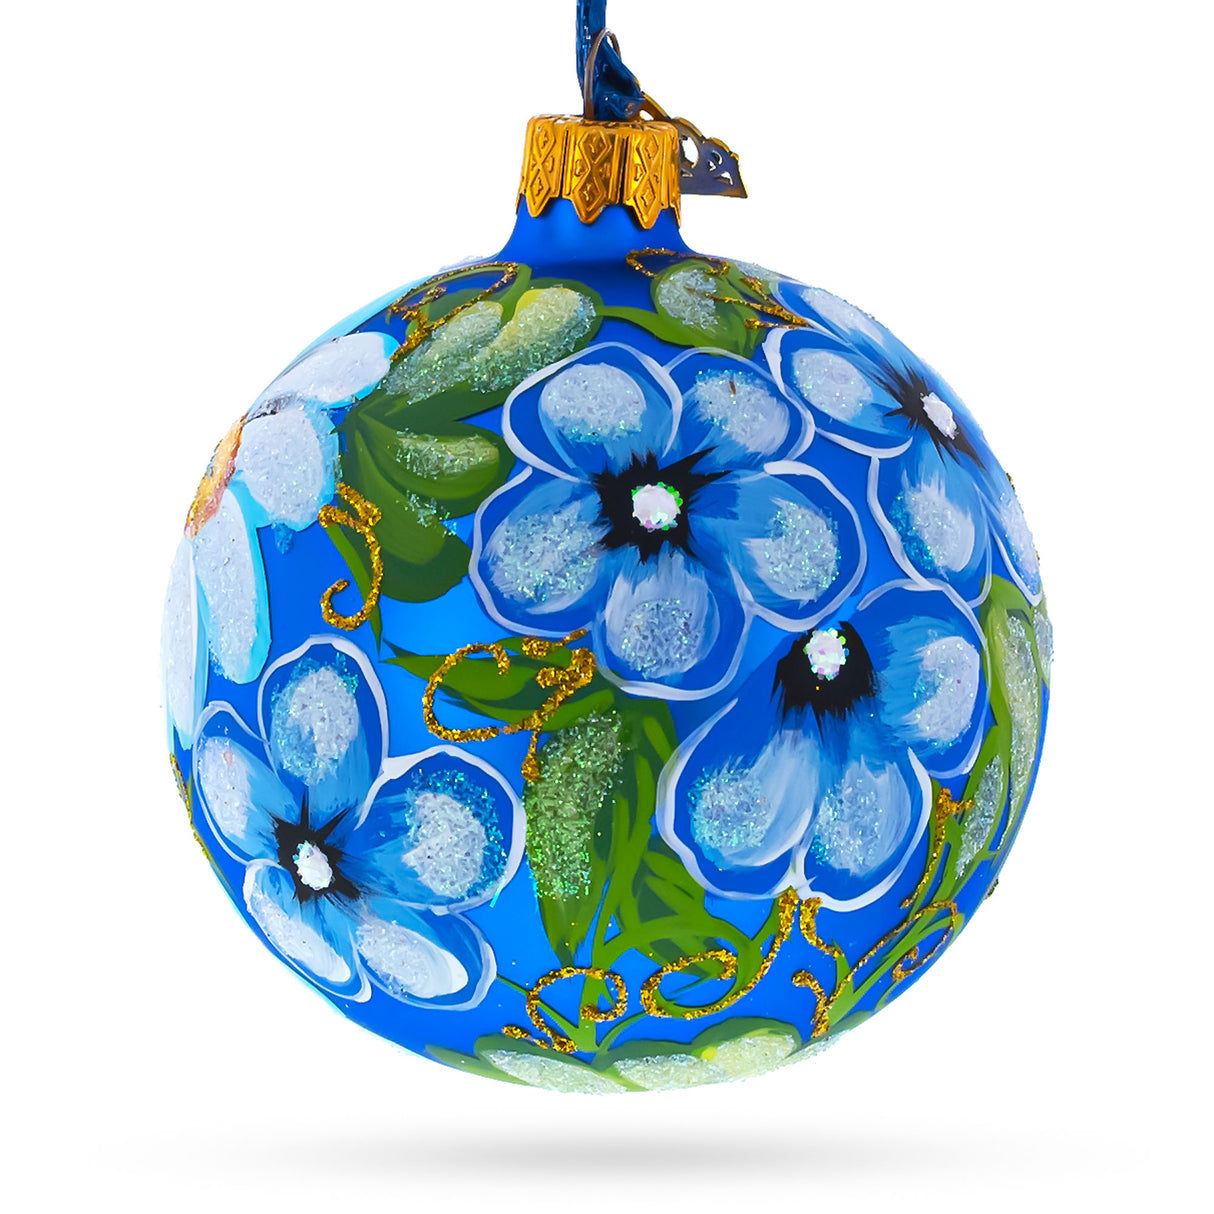 BestPysanky online gift shop sells mouth blown hand made painted xmas decor decorations unique luxury collectible heirloom vintage whimsical elegant festive balls baubles old fashioned european german collection artisan hanging pendants personalized oval